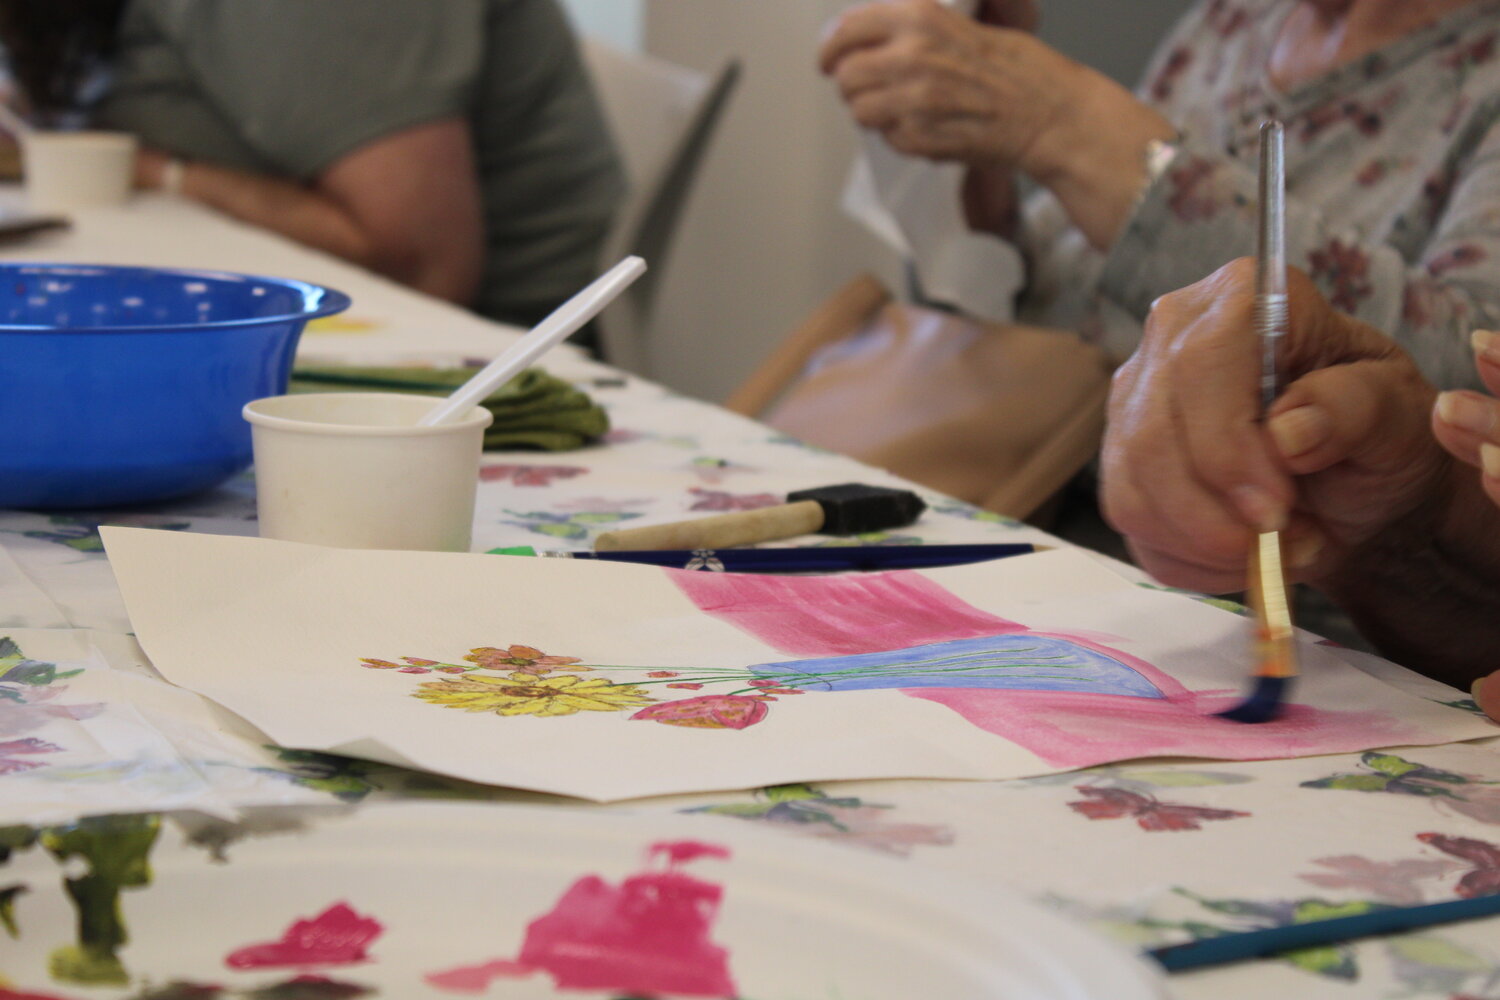 A watercolor painting is shown in progress during the event at the library.